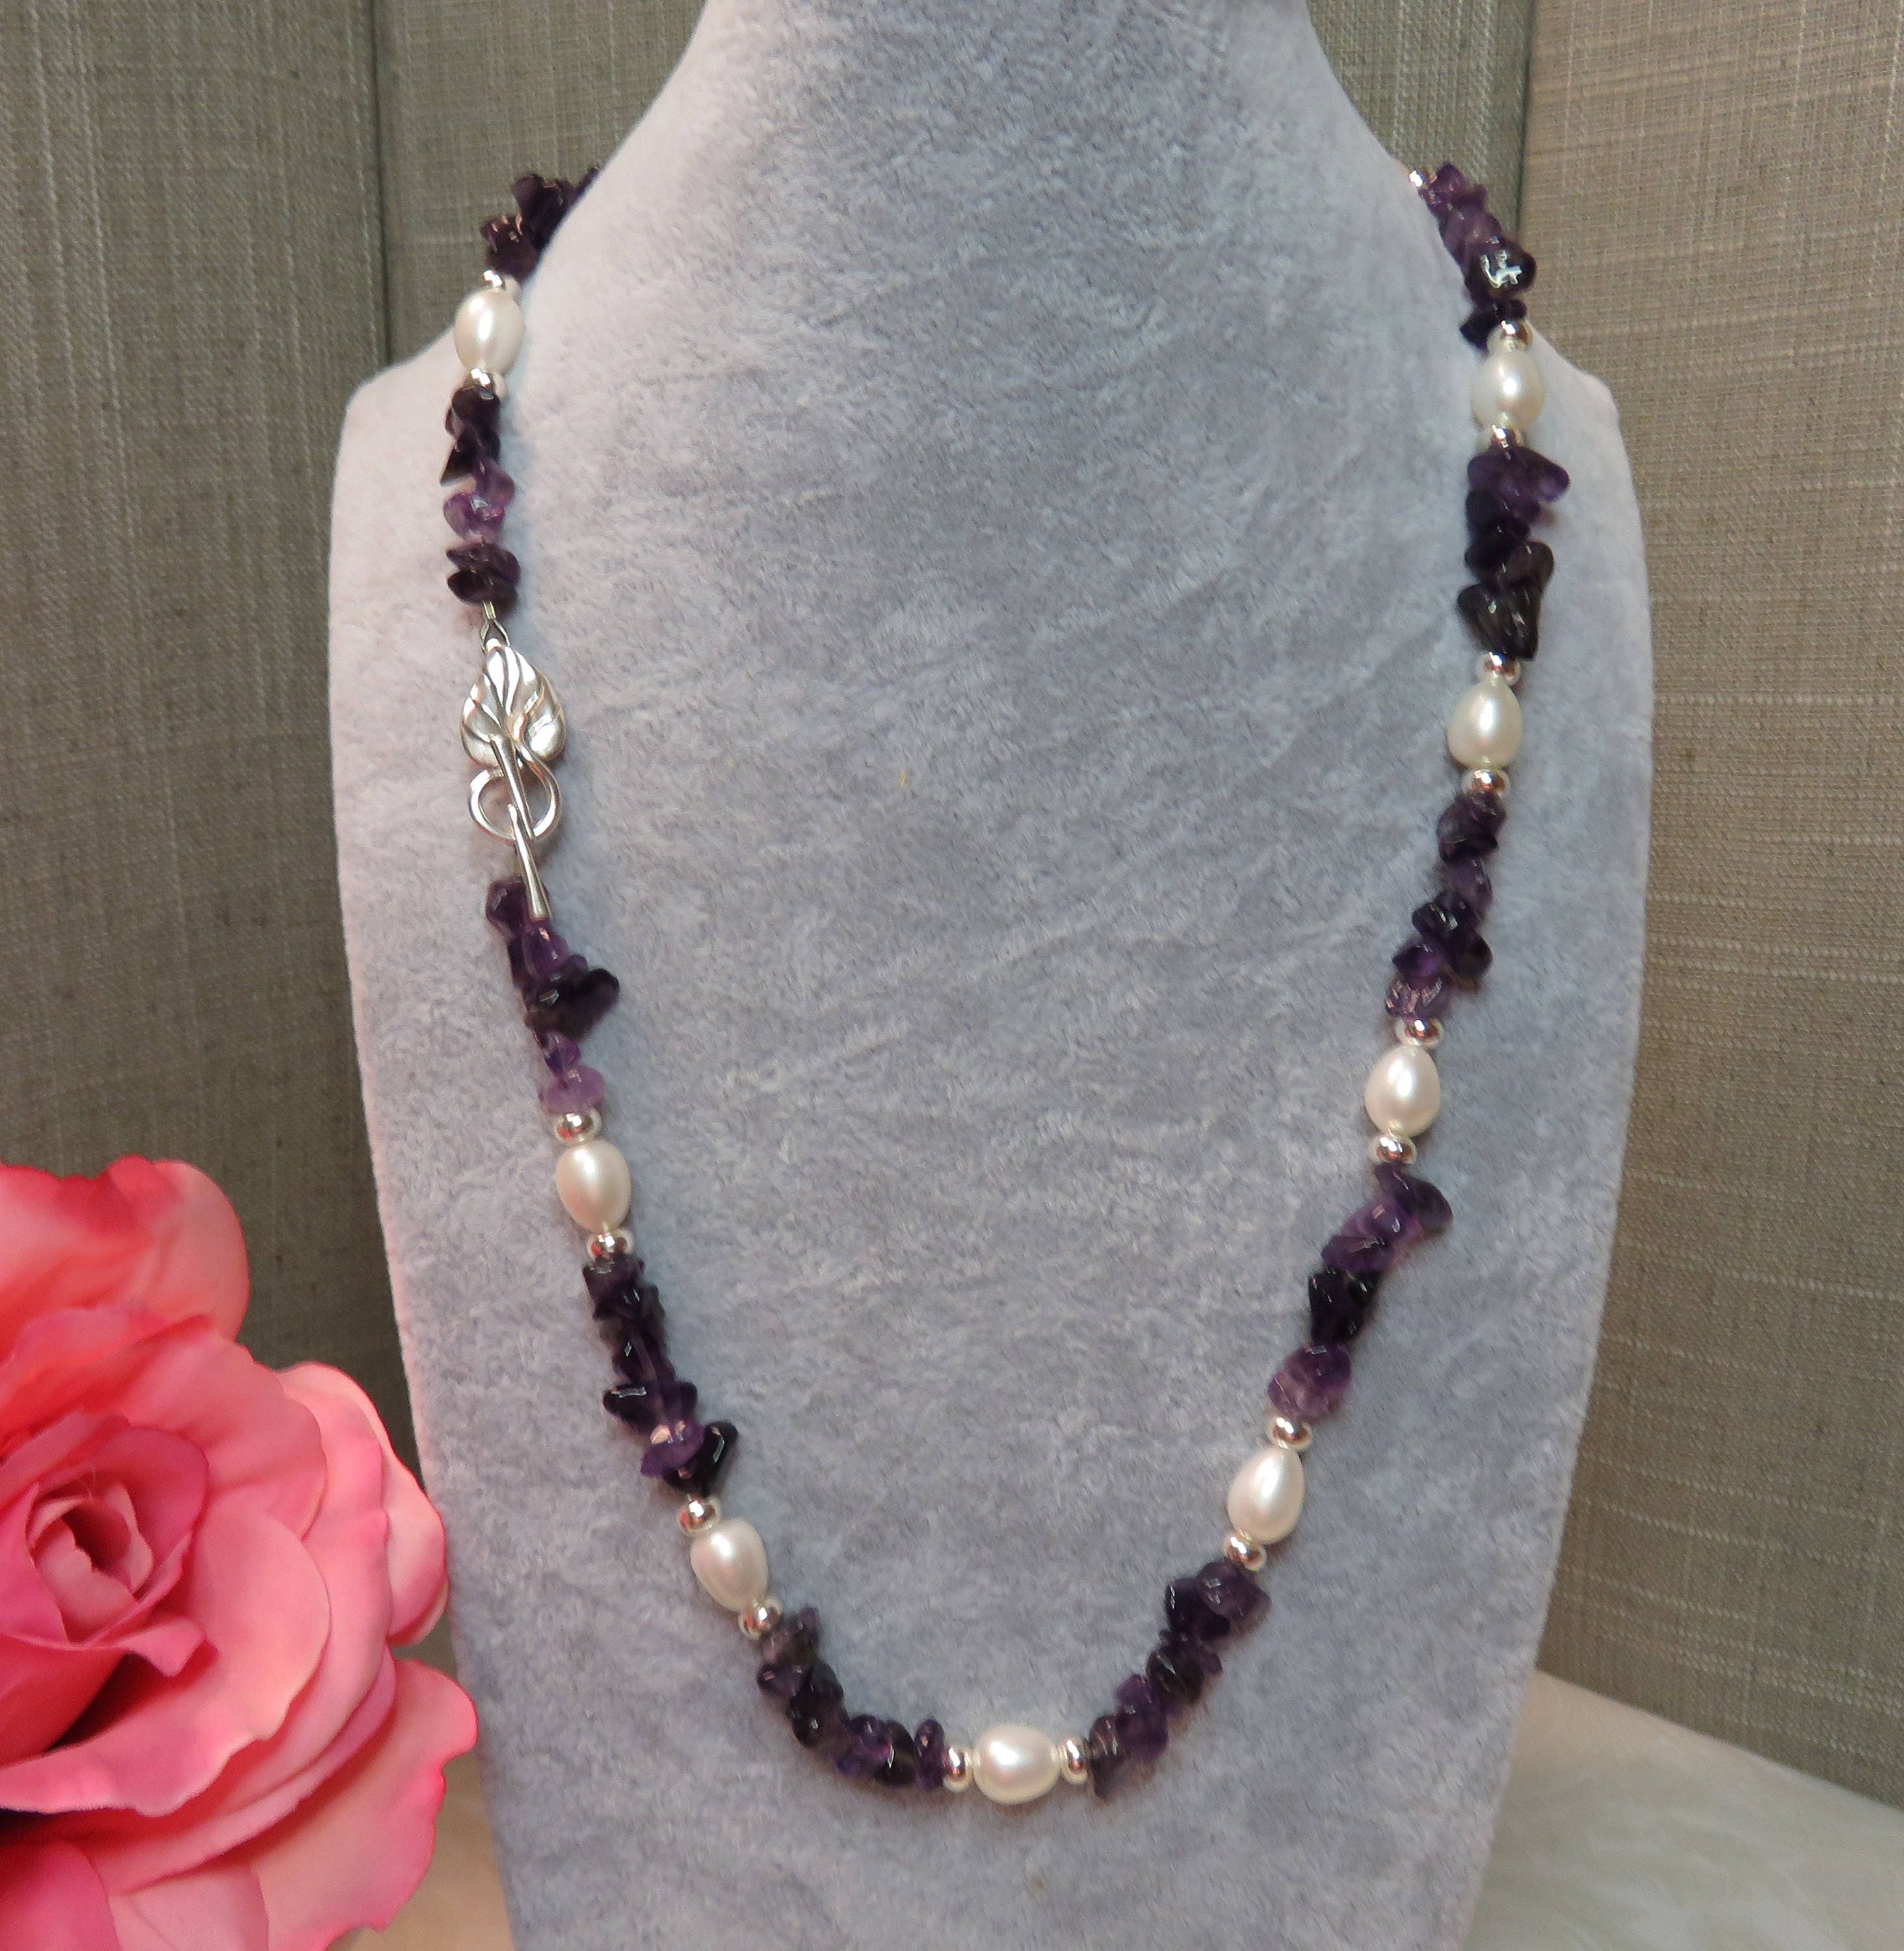 Amethyst Chips and Freshwater Pearl Necklace w/Sterling Silver